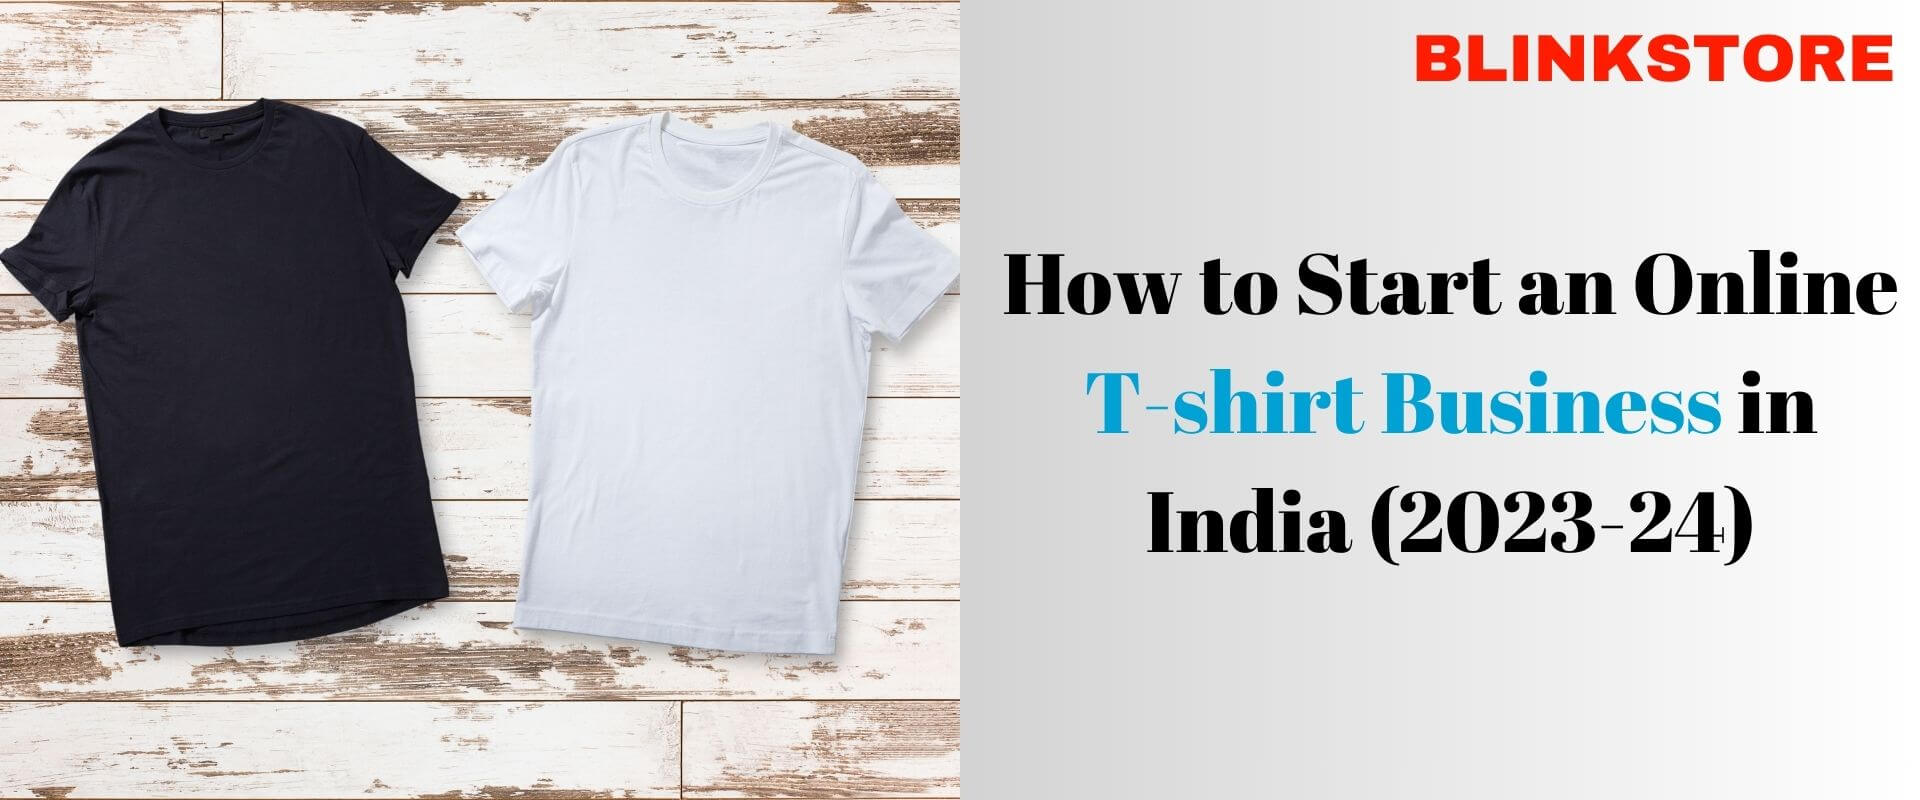 How to Start an Online T-shirt Business in India